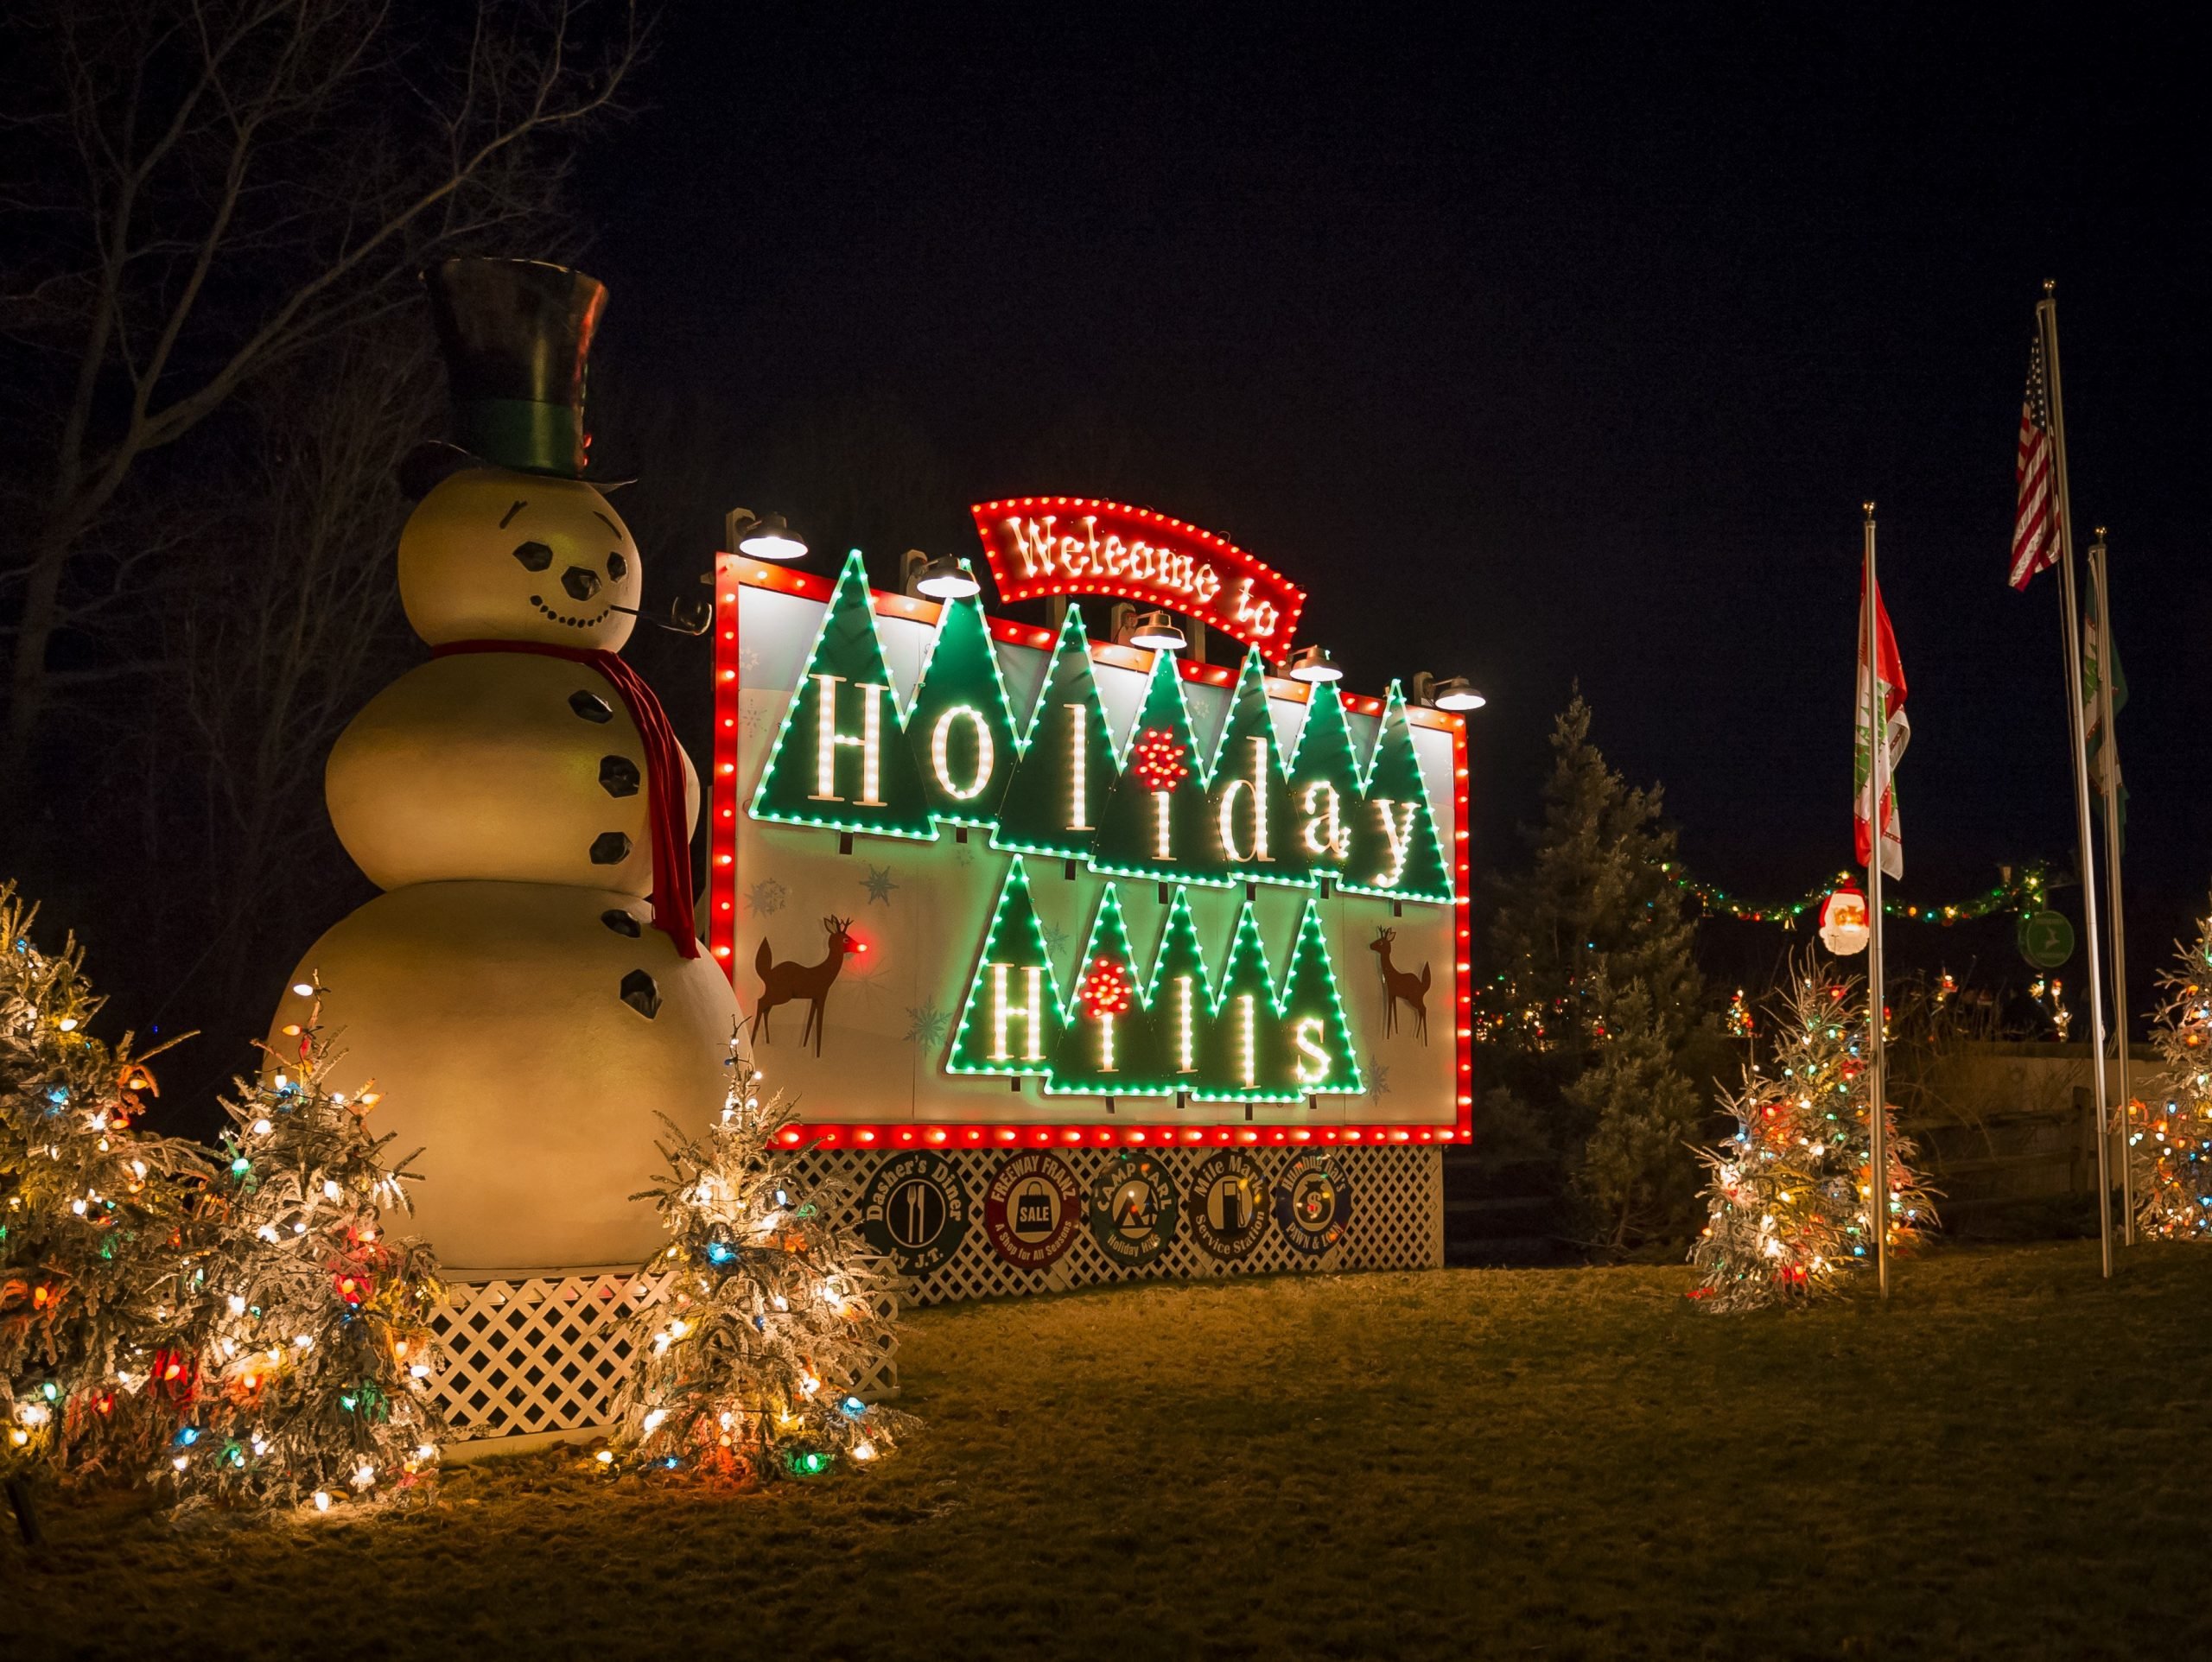 Huge Snowman in front of a lighted Christmas sign that says Welcome to Holiday Hills